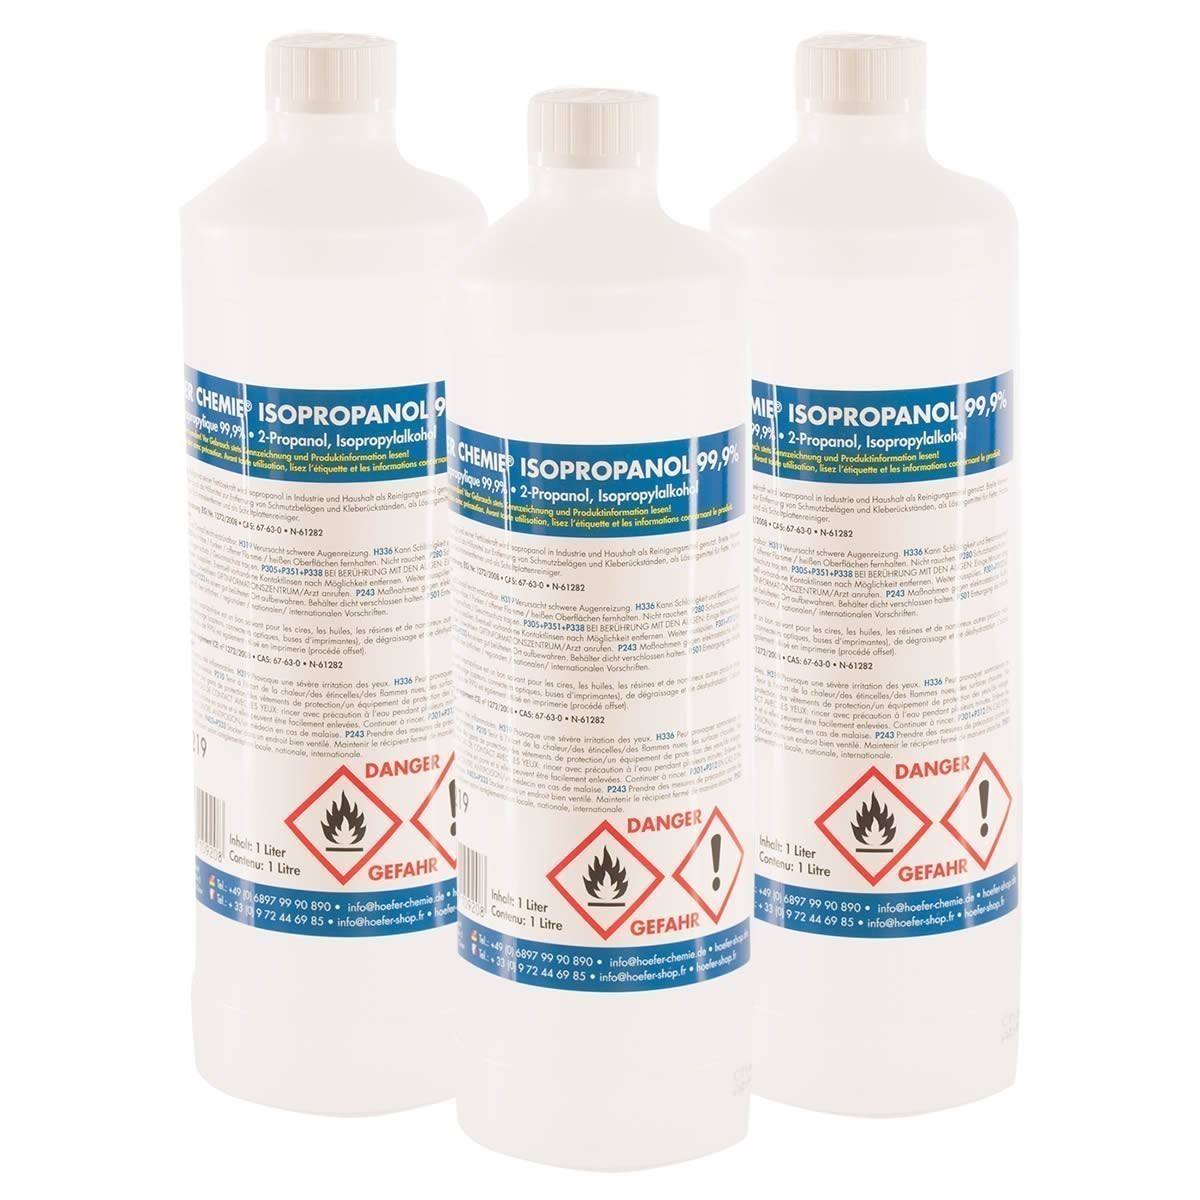 Isopropanol 99.9 %, 1 liter, for effects.